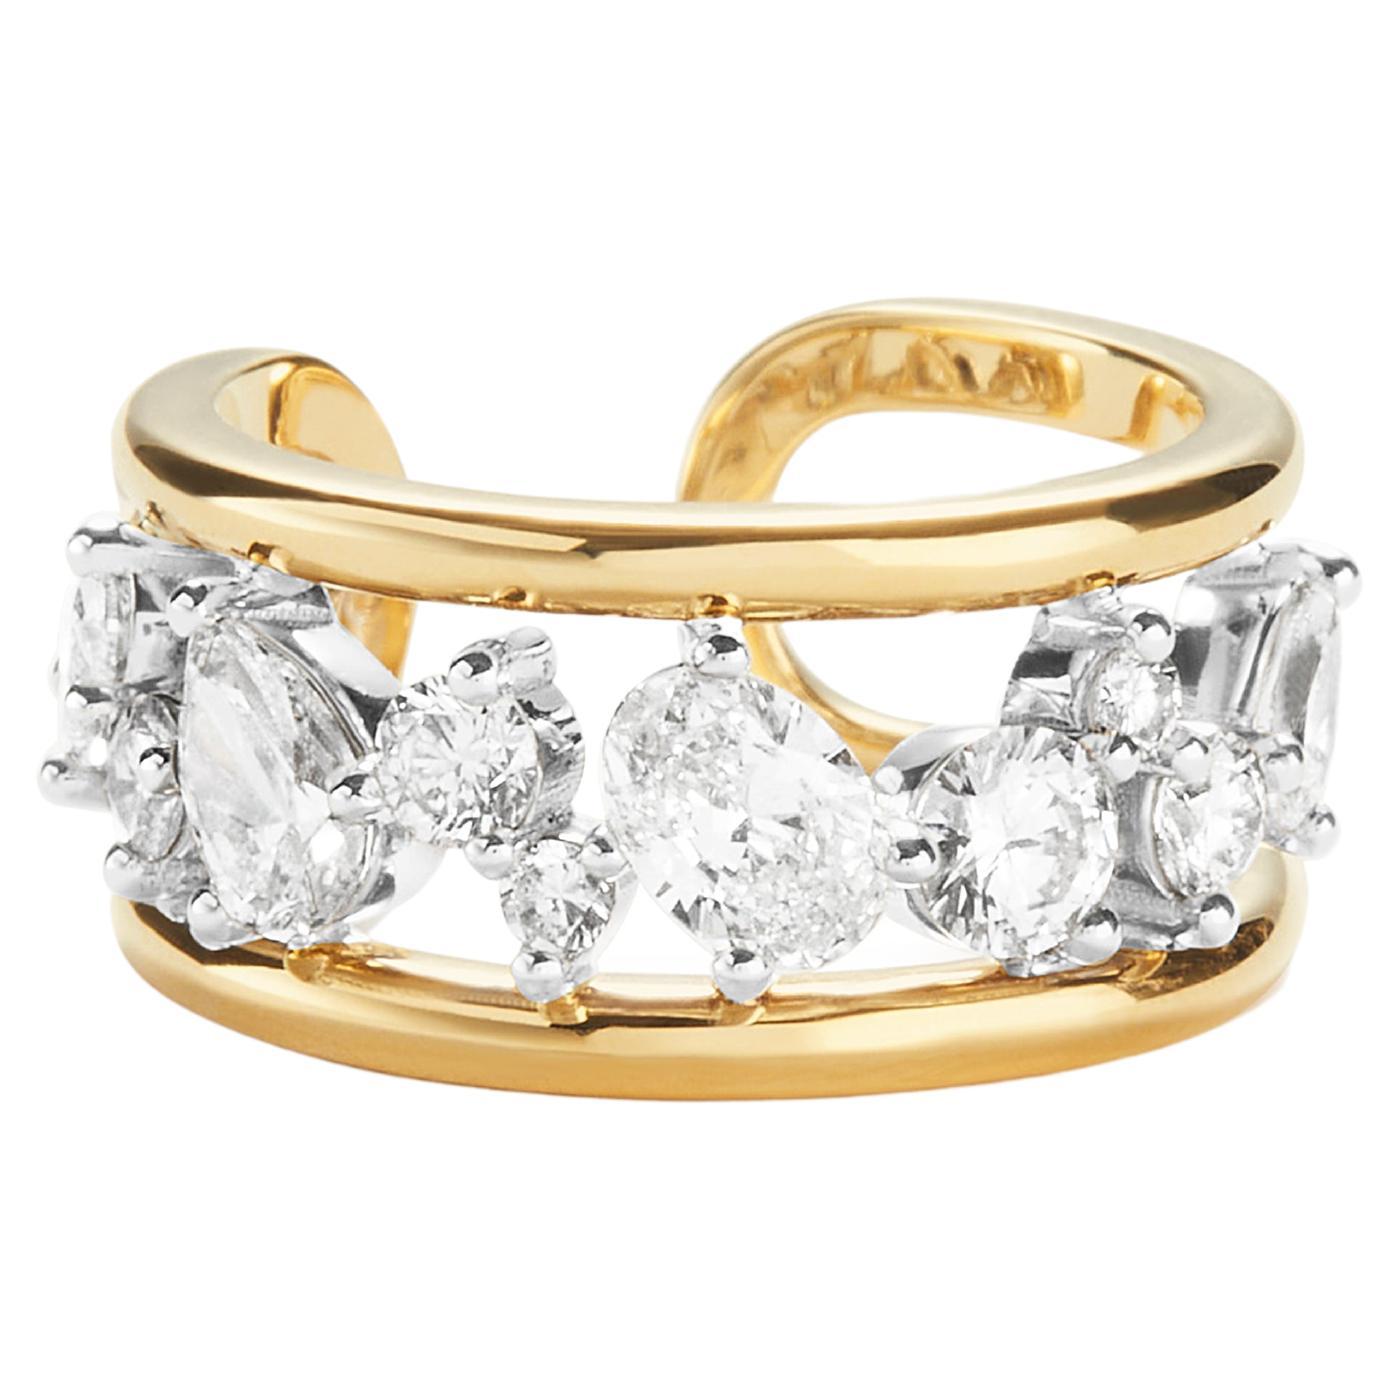 For Sale:  Rosario Navia Mara Large Link Ring in 18K Gold, Platinum, and Diamonds